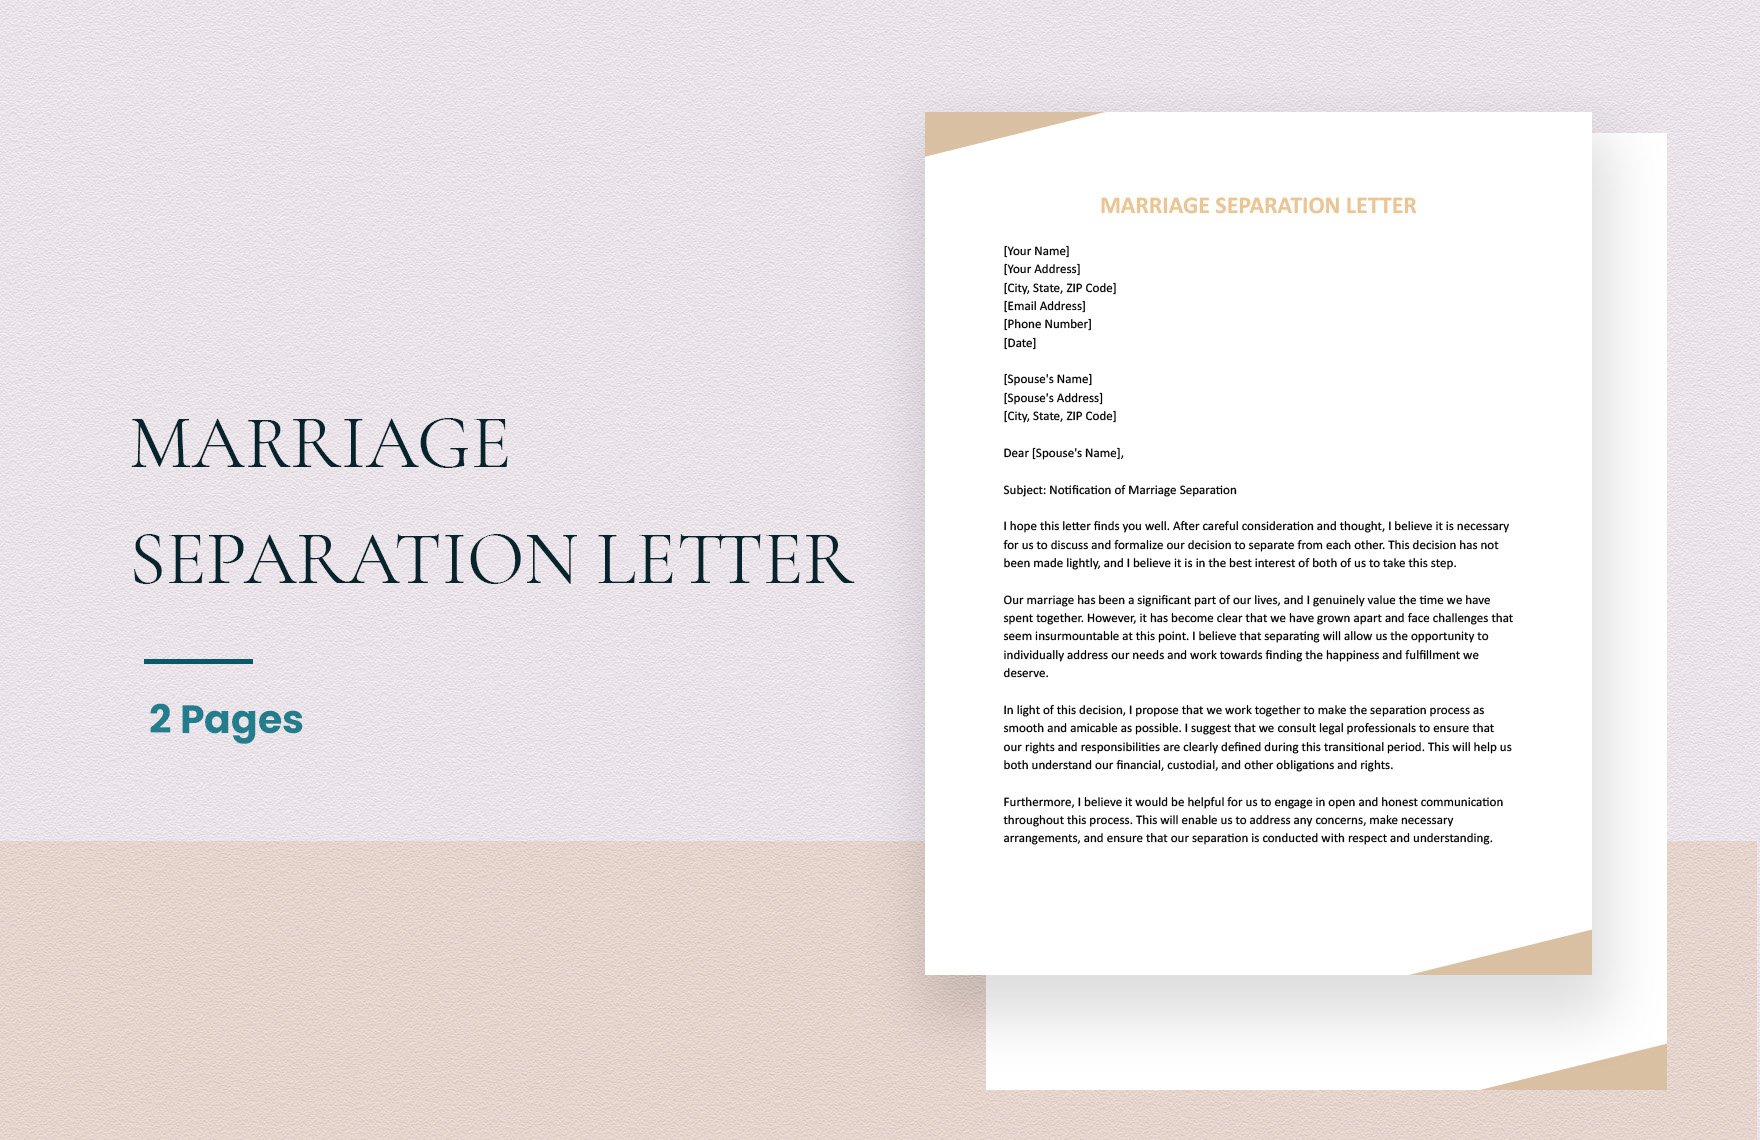 Marriage Separation Letter